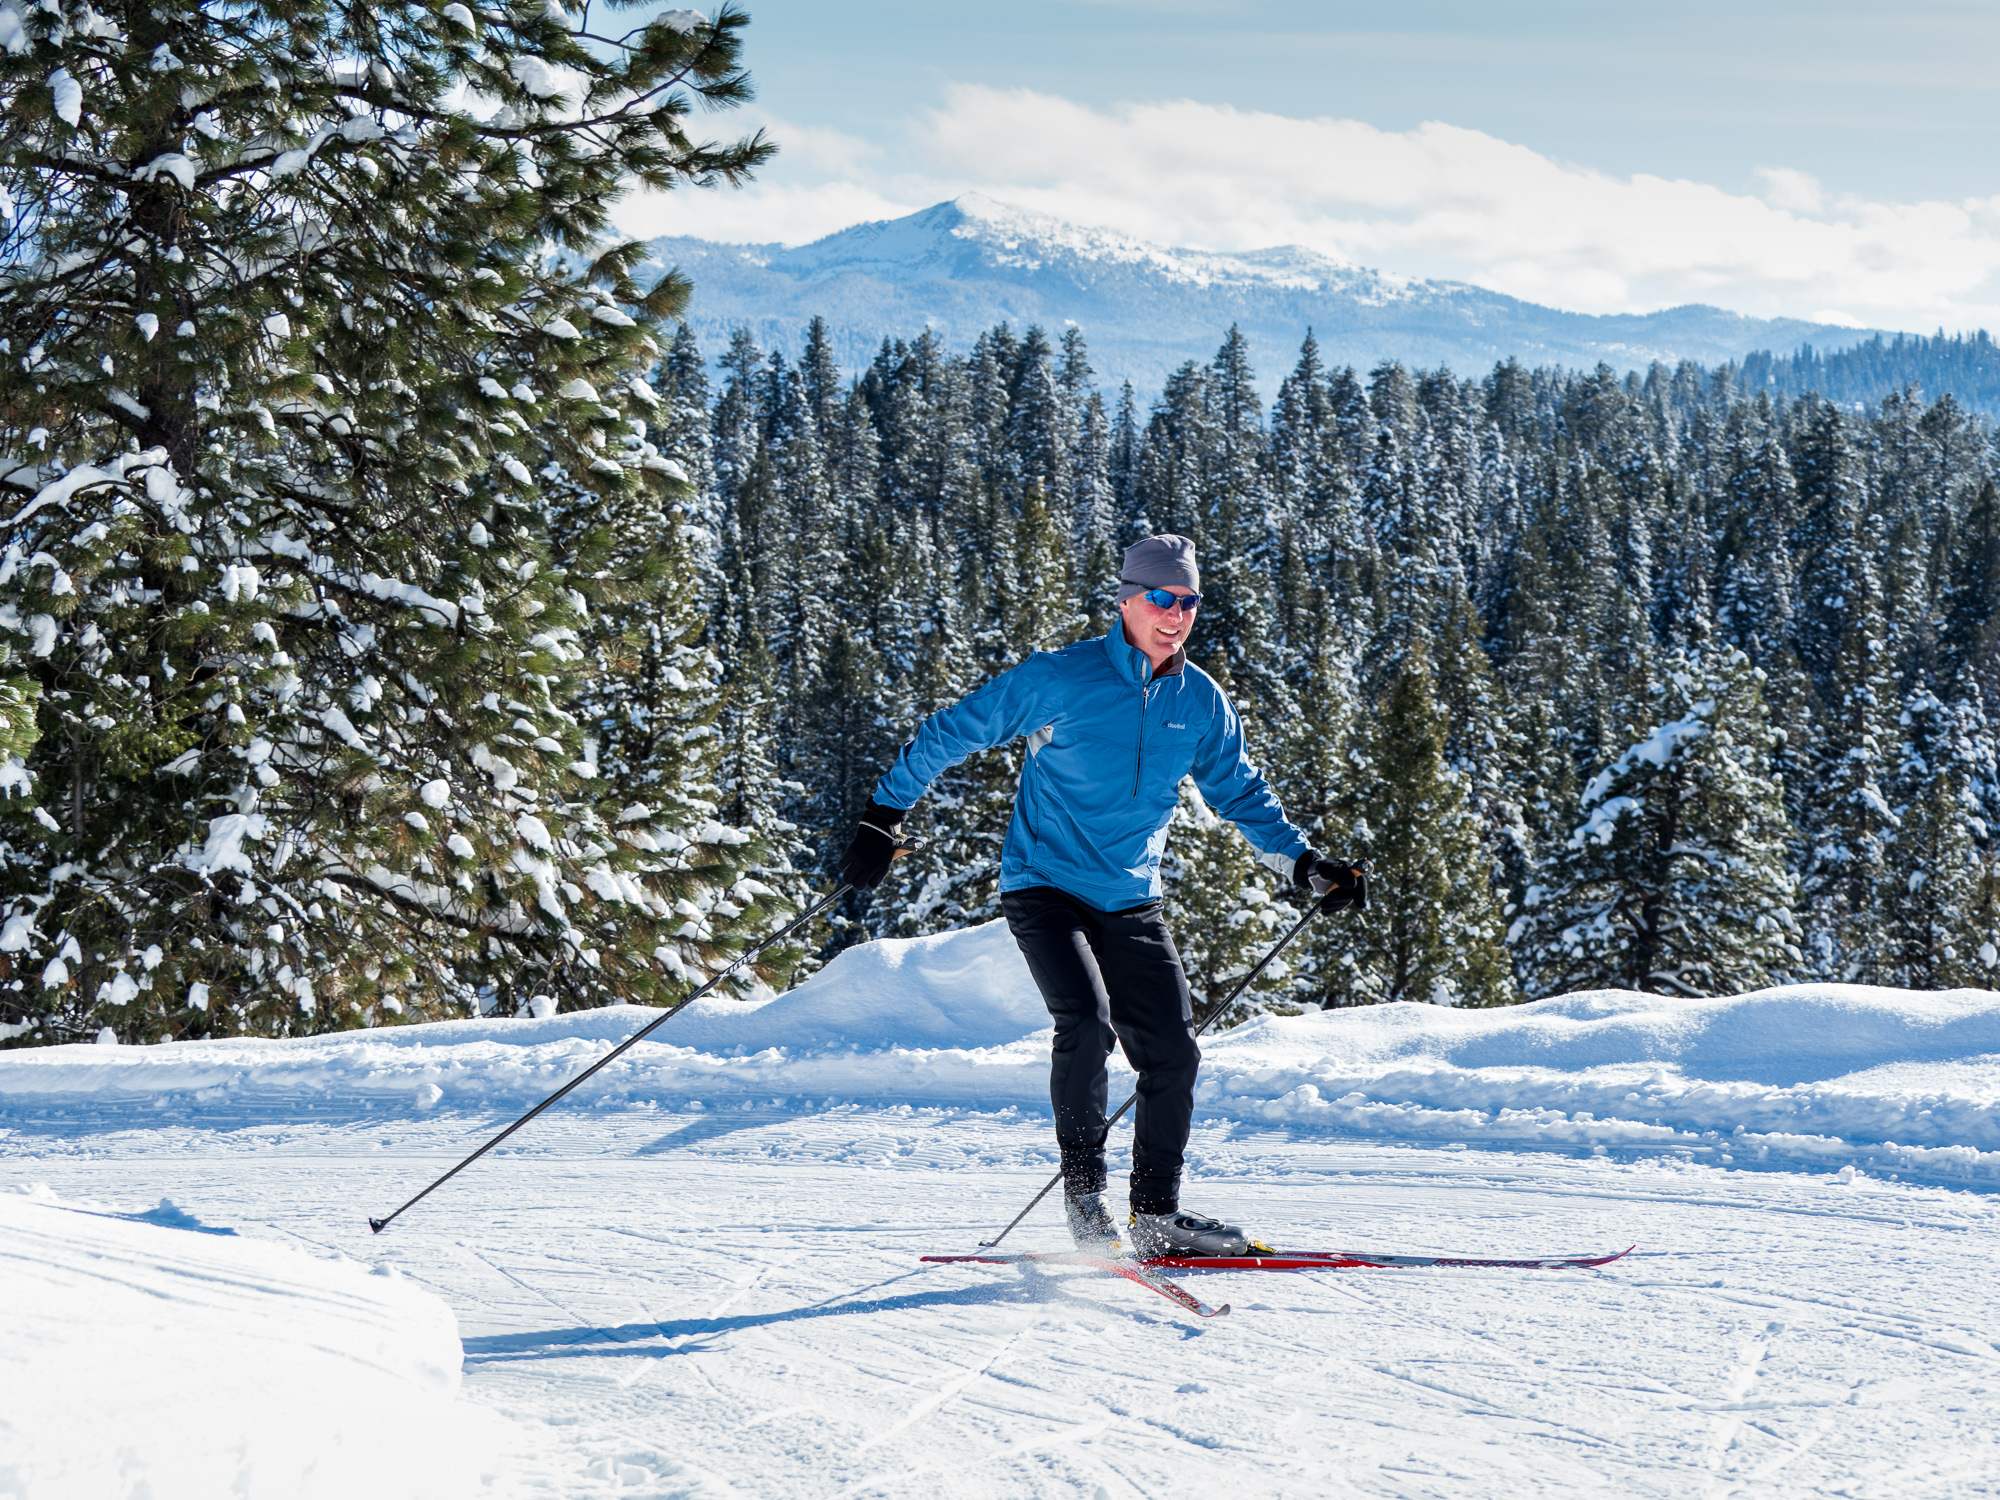 Skate Skier climbing the groomed trails at Osprey Point, Ponderosa State Park.